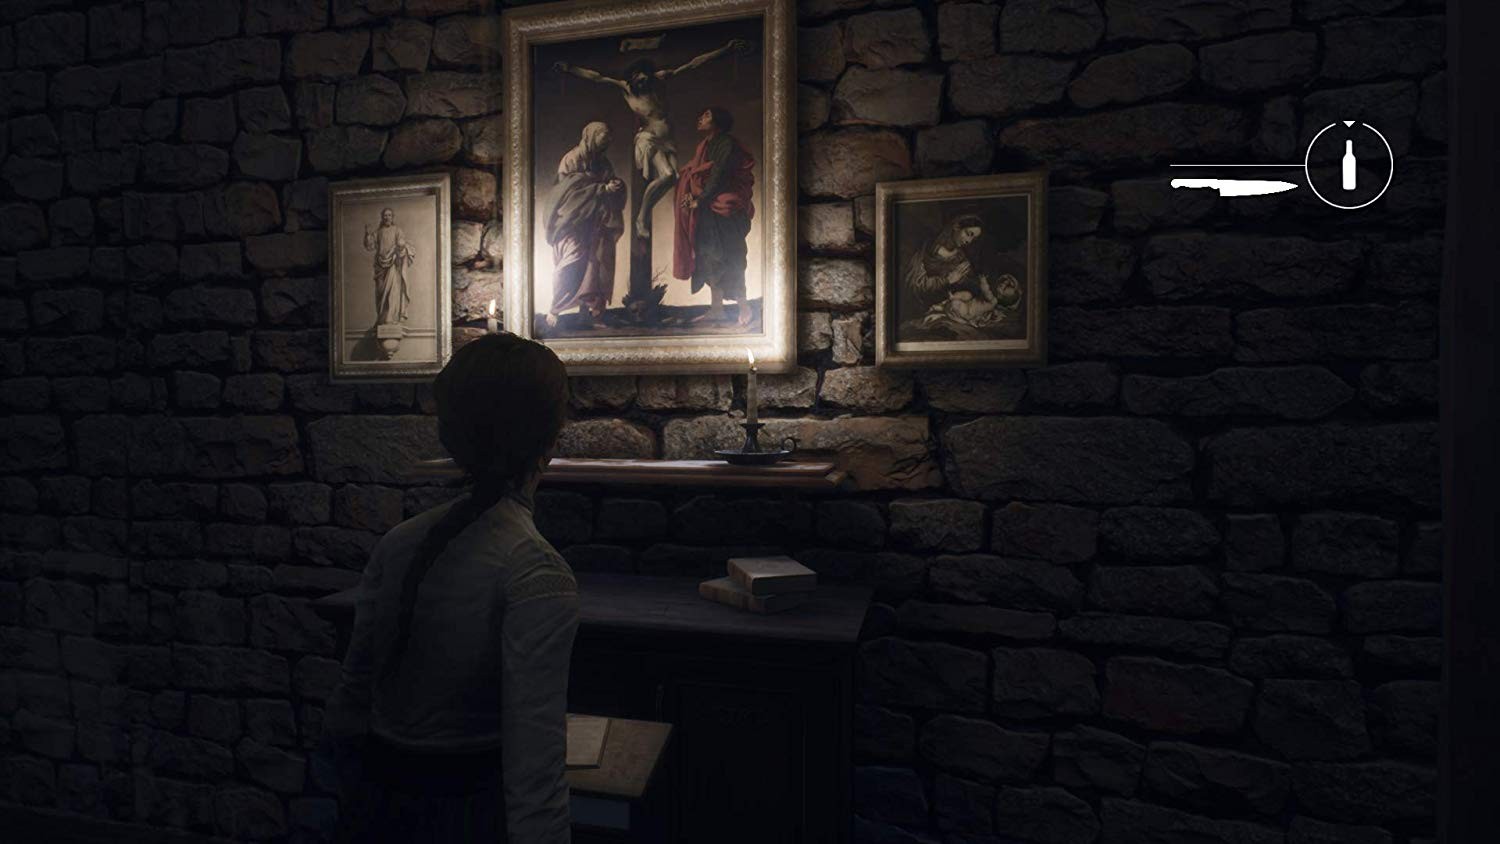 remothered: broken porcelain, stormind games, modus games, us, north america,europe, release date, gameplay, features, price,pre-order now, ps4, playstation 4, xone, xbox one, switch, nintendo switch